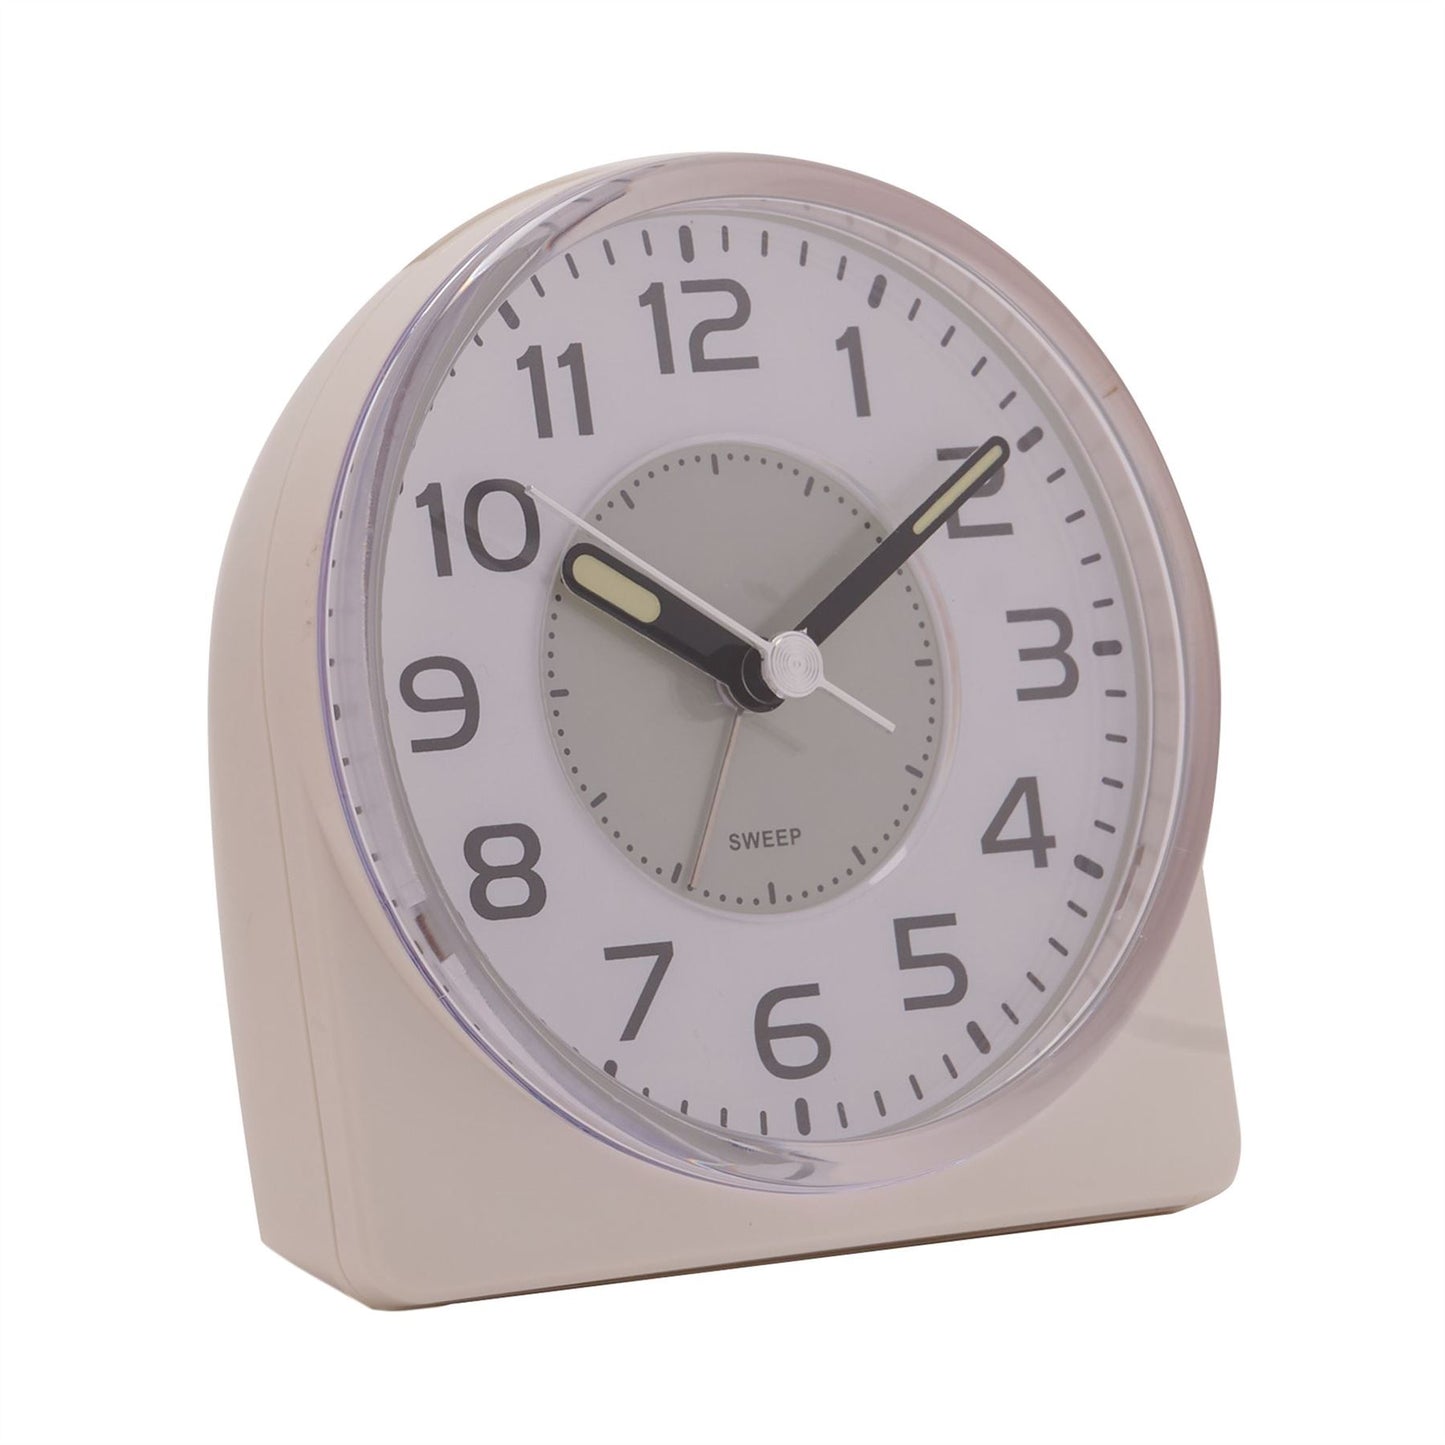 Wm.Widdop Silent Sweep Round Face Blinking Light Alarm Clock 9507 Available Multiple Colour